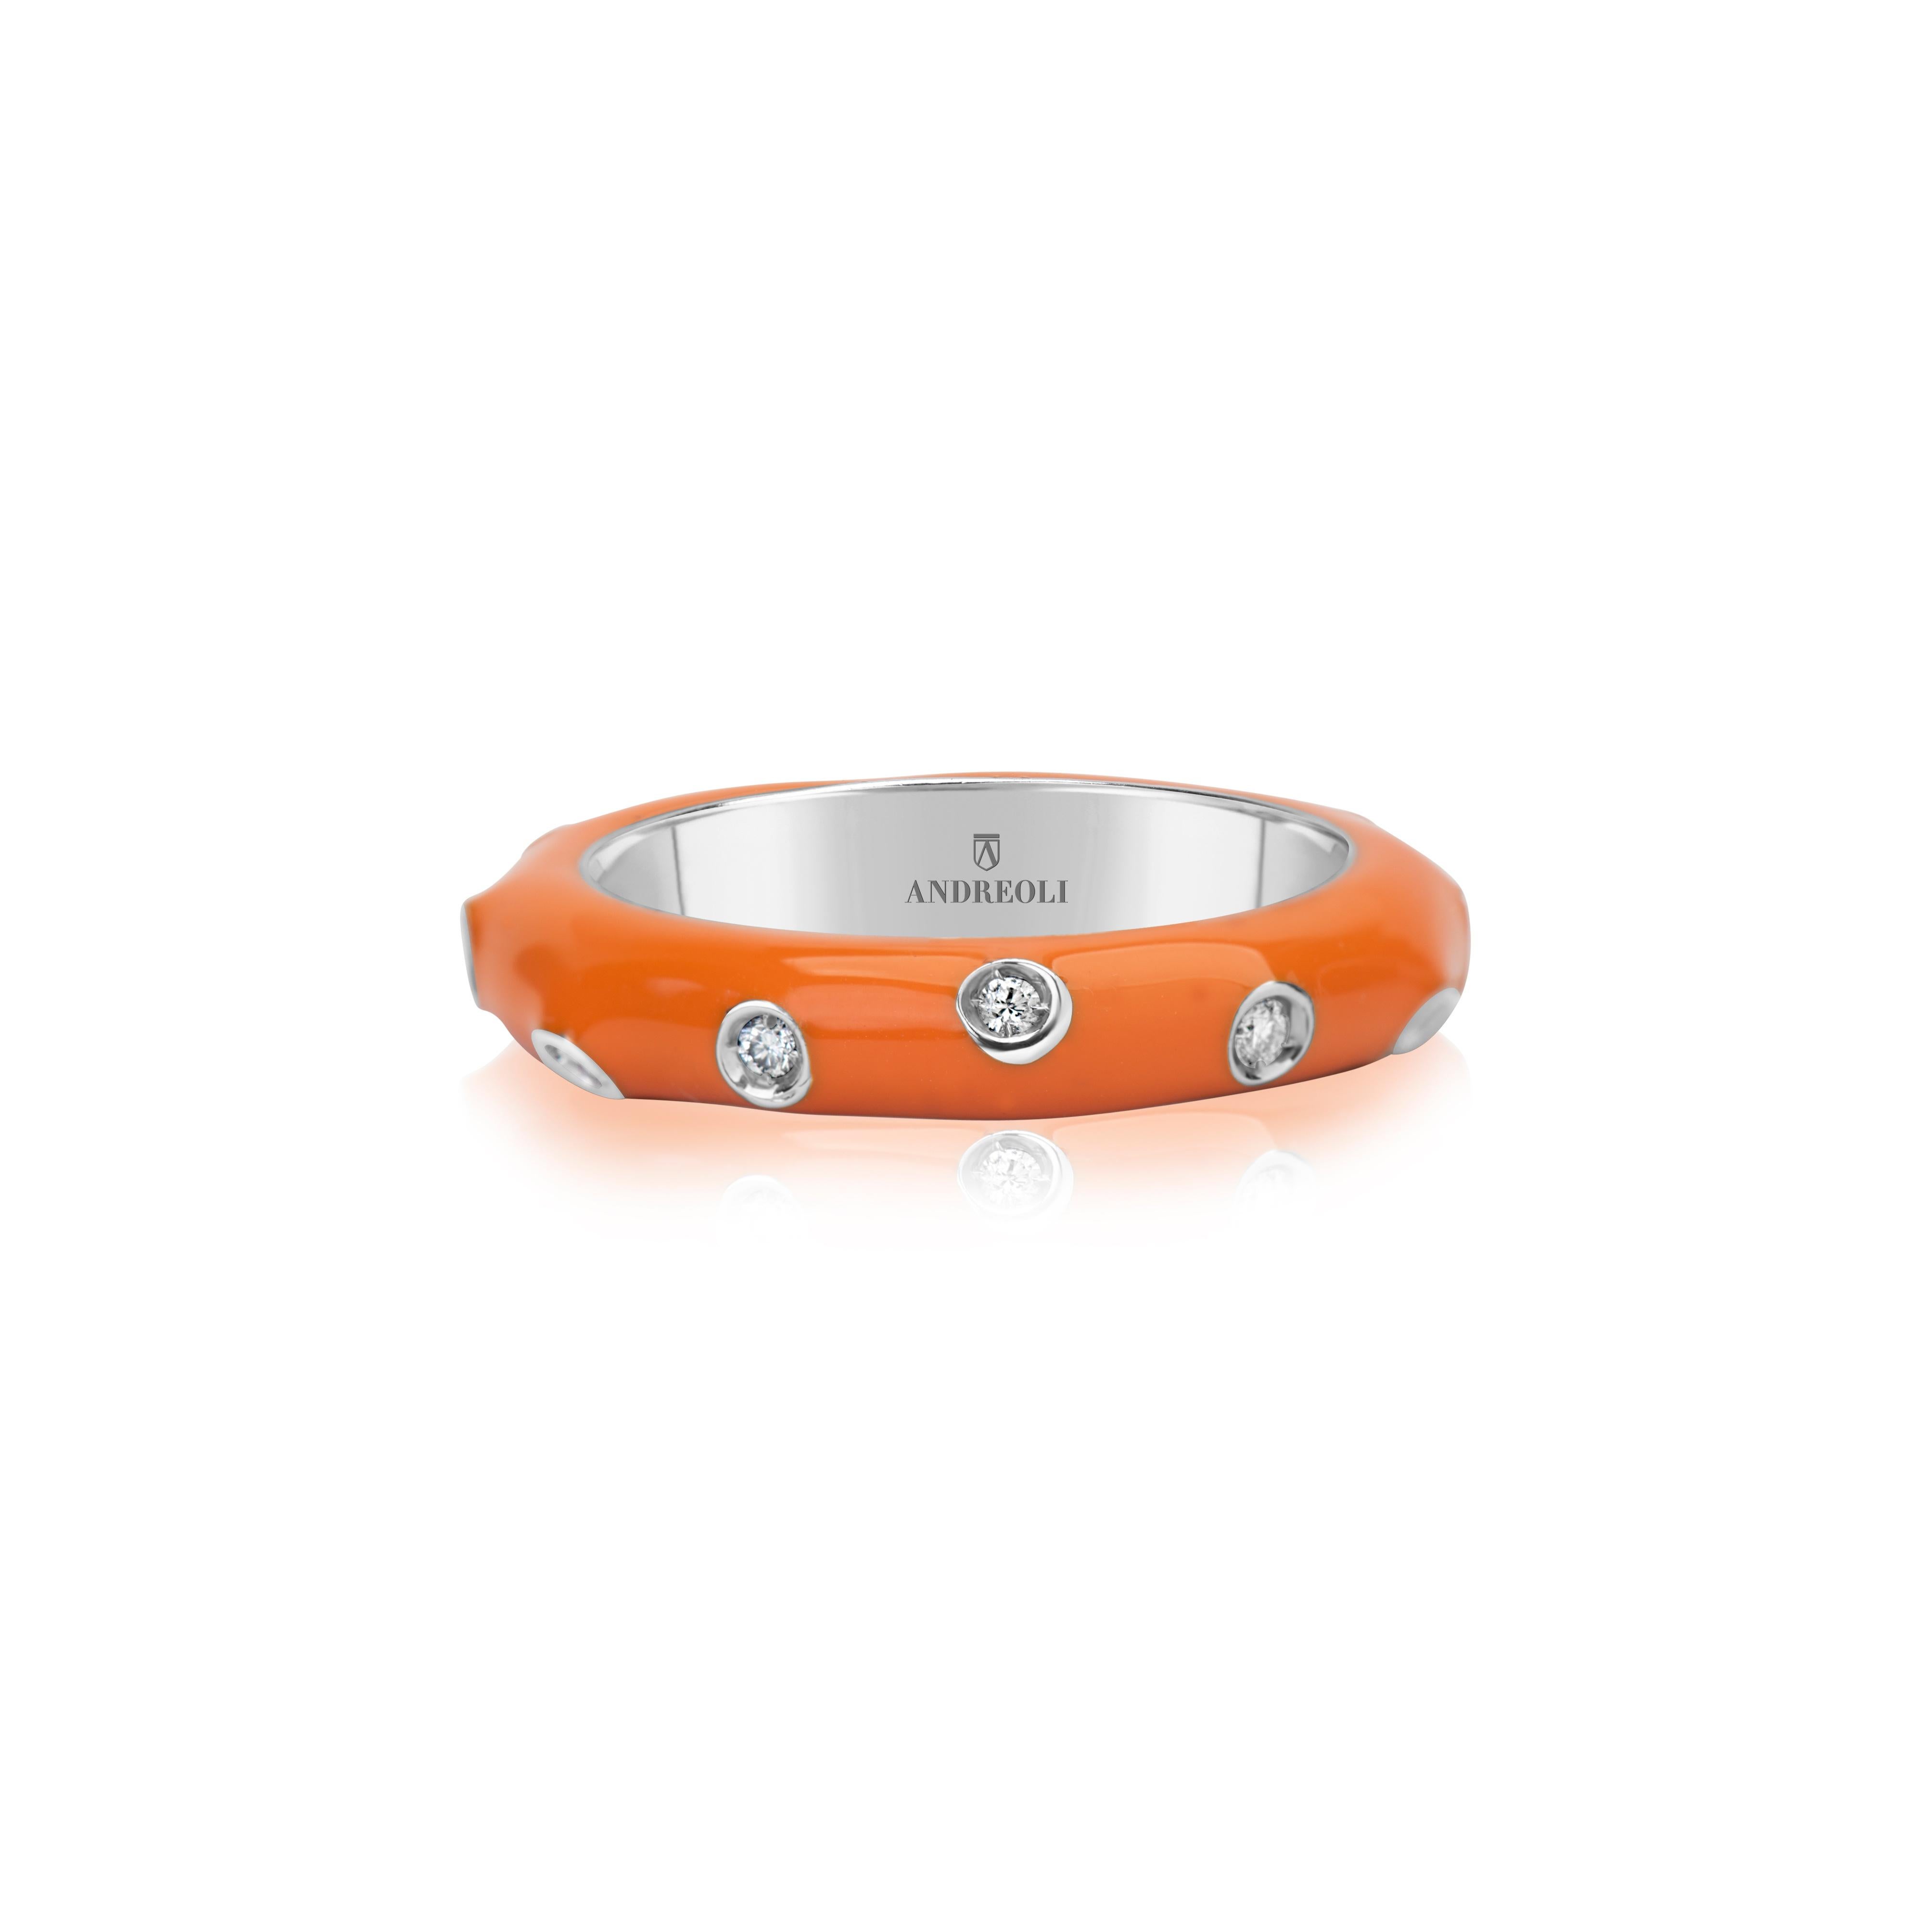 Andreoli Orange Enamel Diamond Band Ring 18k White Gold

This Andreoli ring features:
- 0.17 carat Diamond
- 9.10 grams 18 karat white gold
- Orange Enamel
- Made in Italy
- Ring Size 7.00
